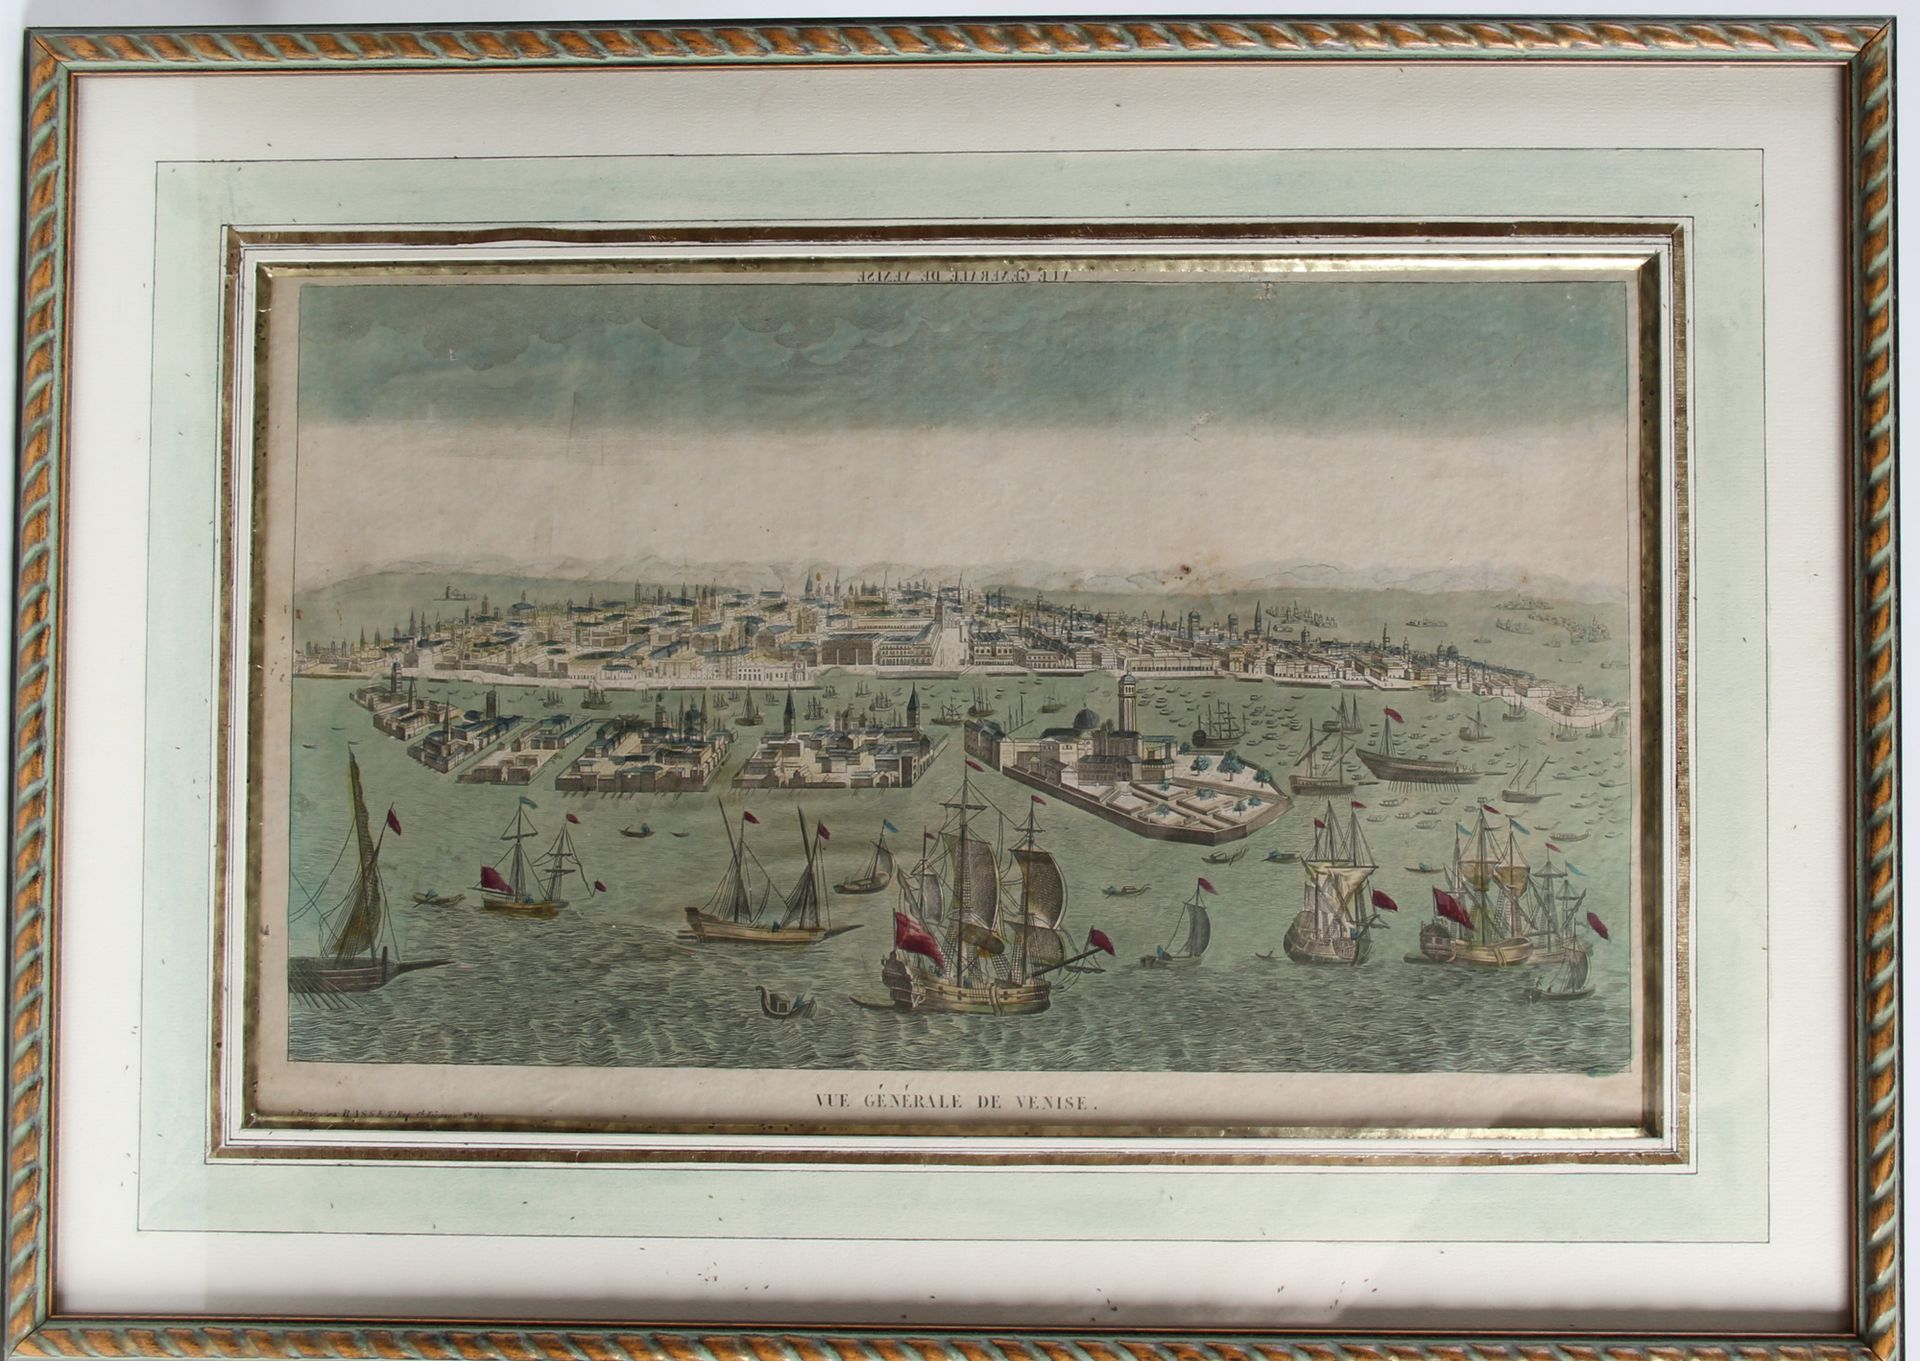 Null TWO OPTICAL VIEWS OF THE XVIII

"General view of Venice

Dimensions : 25,5 &hellip;